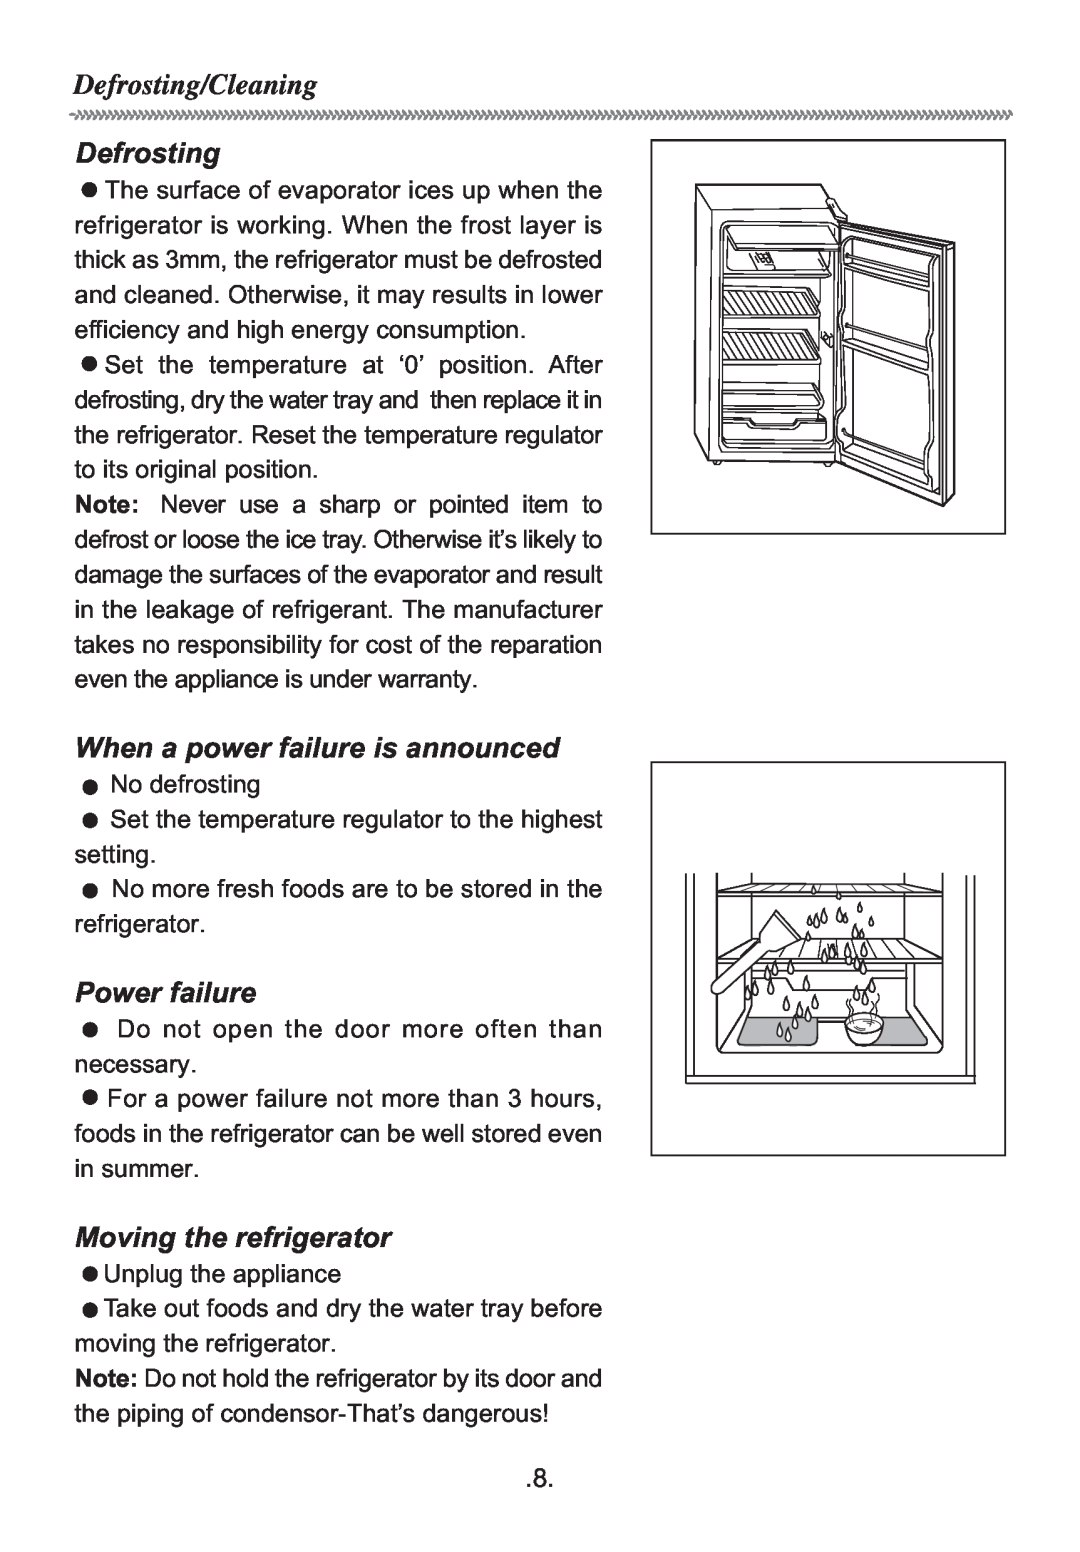 Haier HR-155S manual Defrosting/Cleaning, When a power failure is announced, Power failure, Moving the refrigerator 